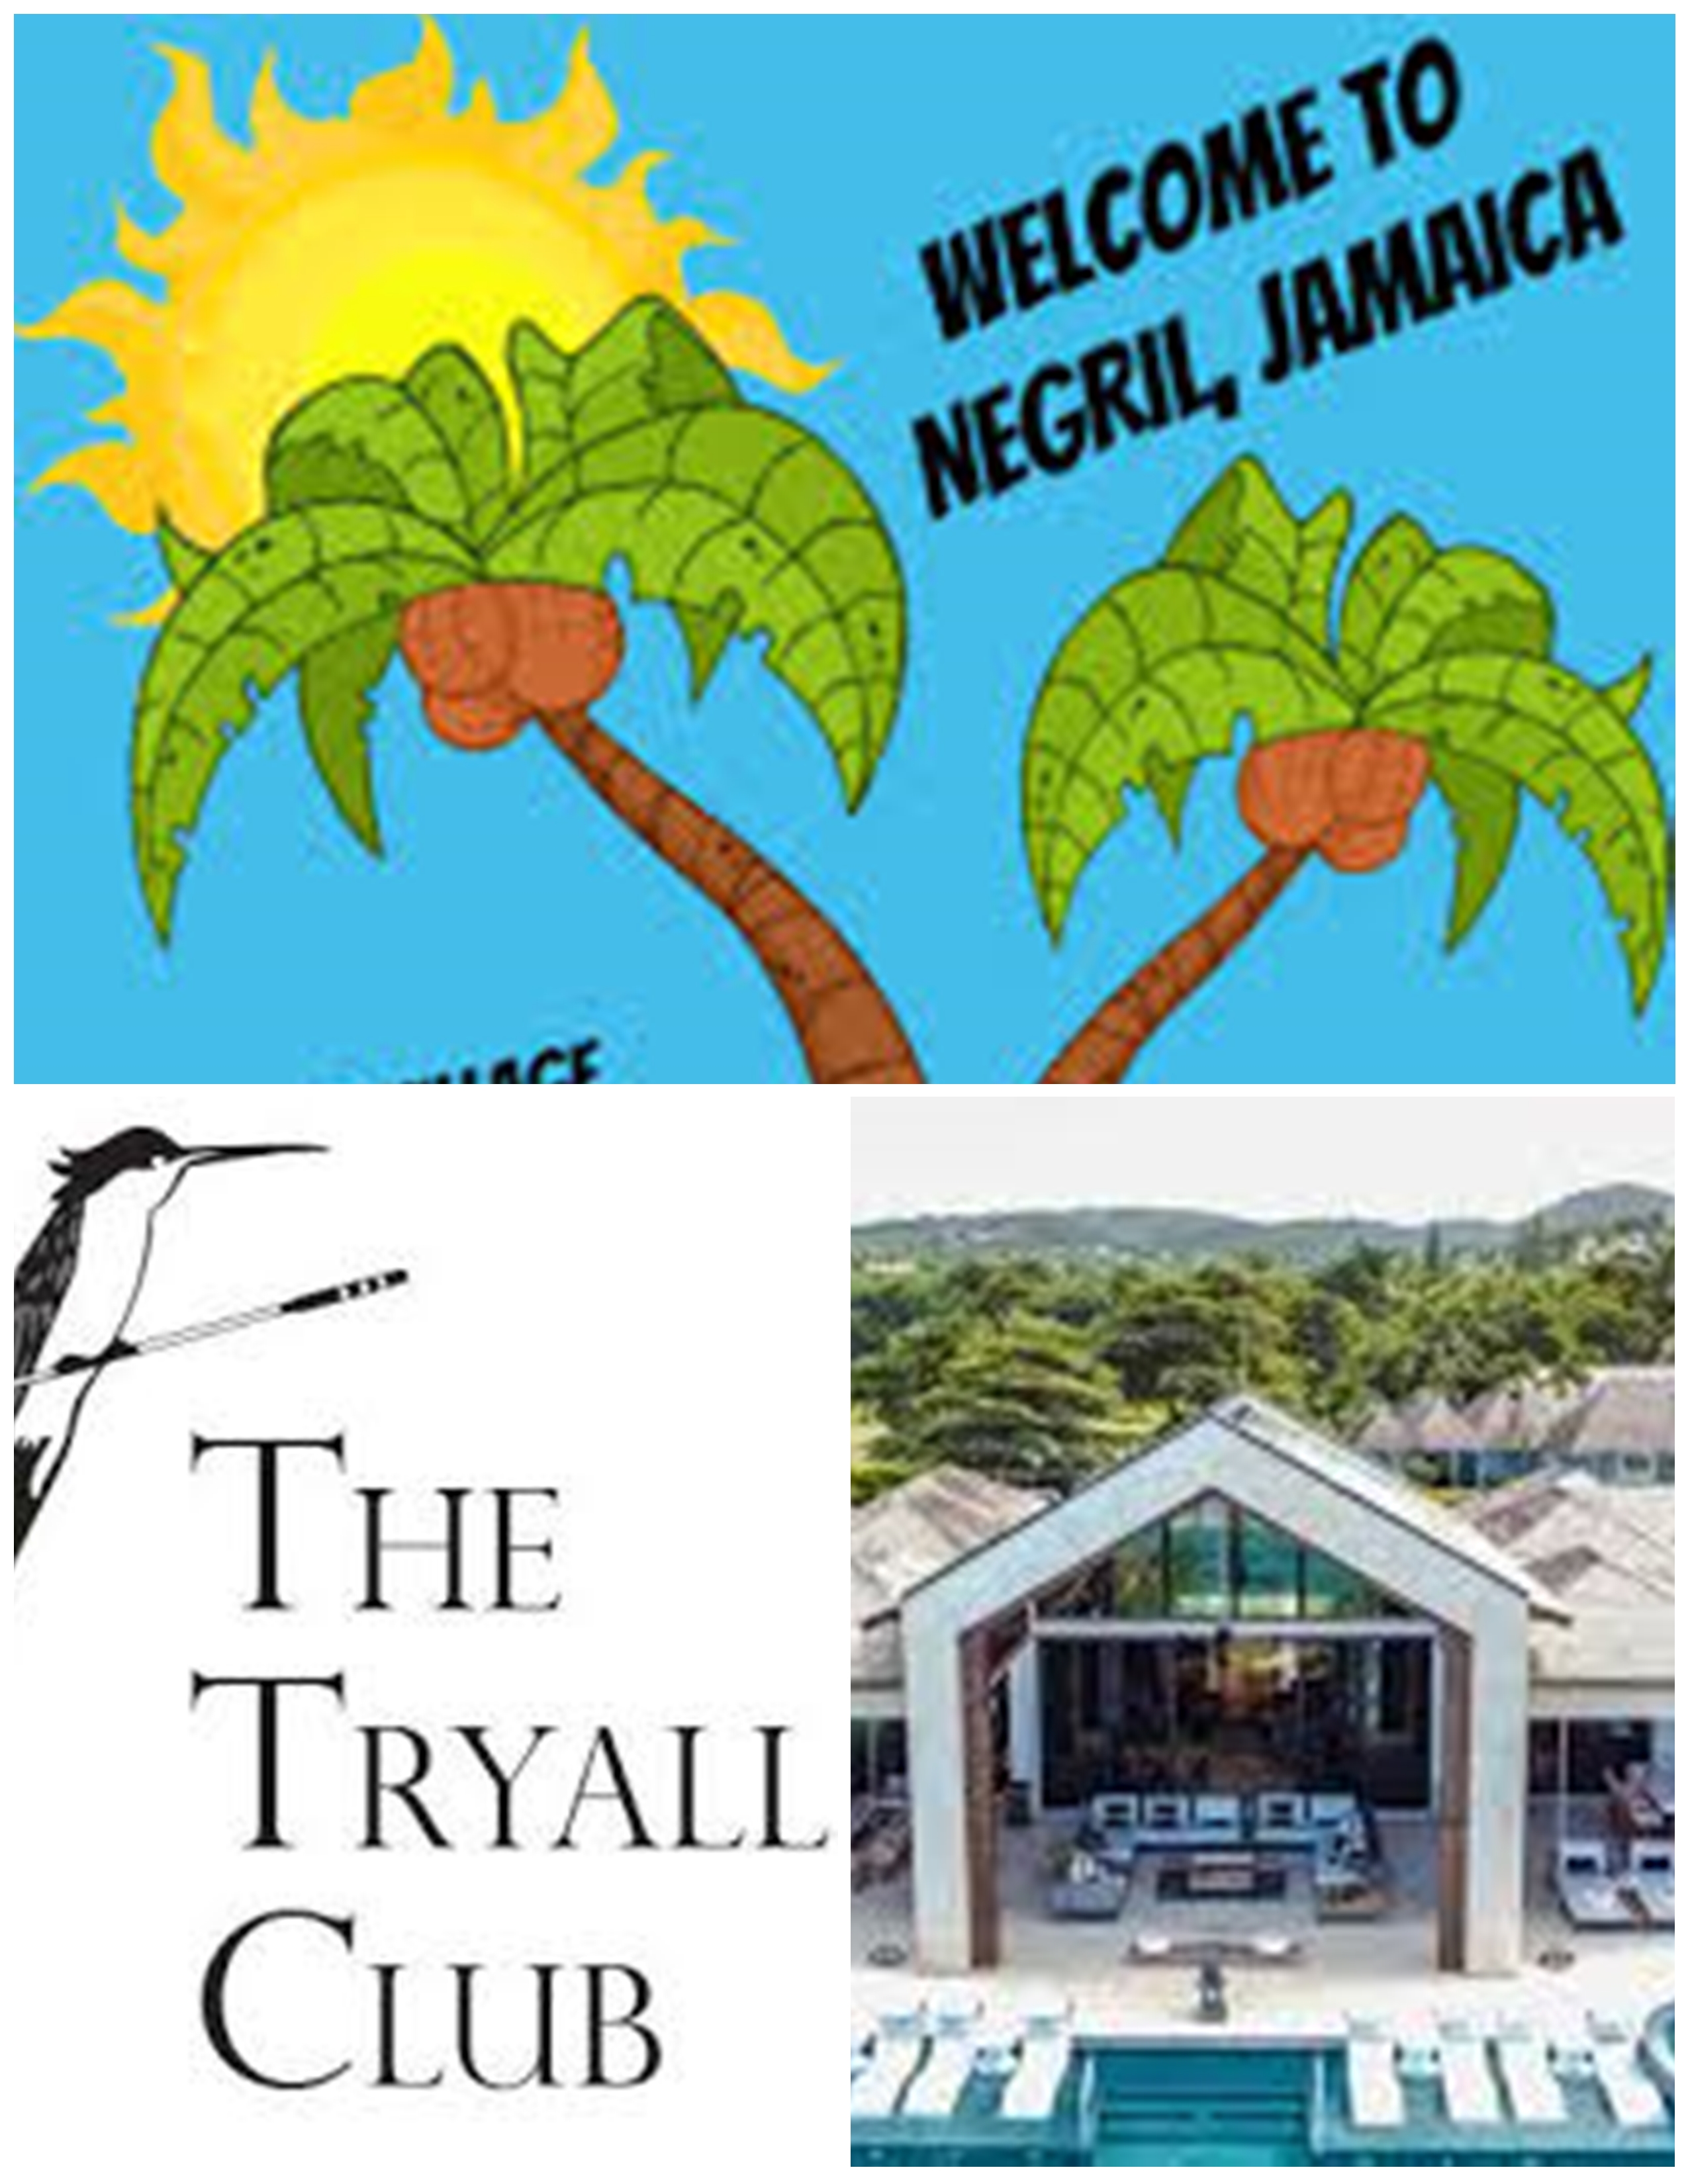 From Negril Centre - The Tryall Club ( Round Trip)